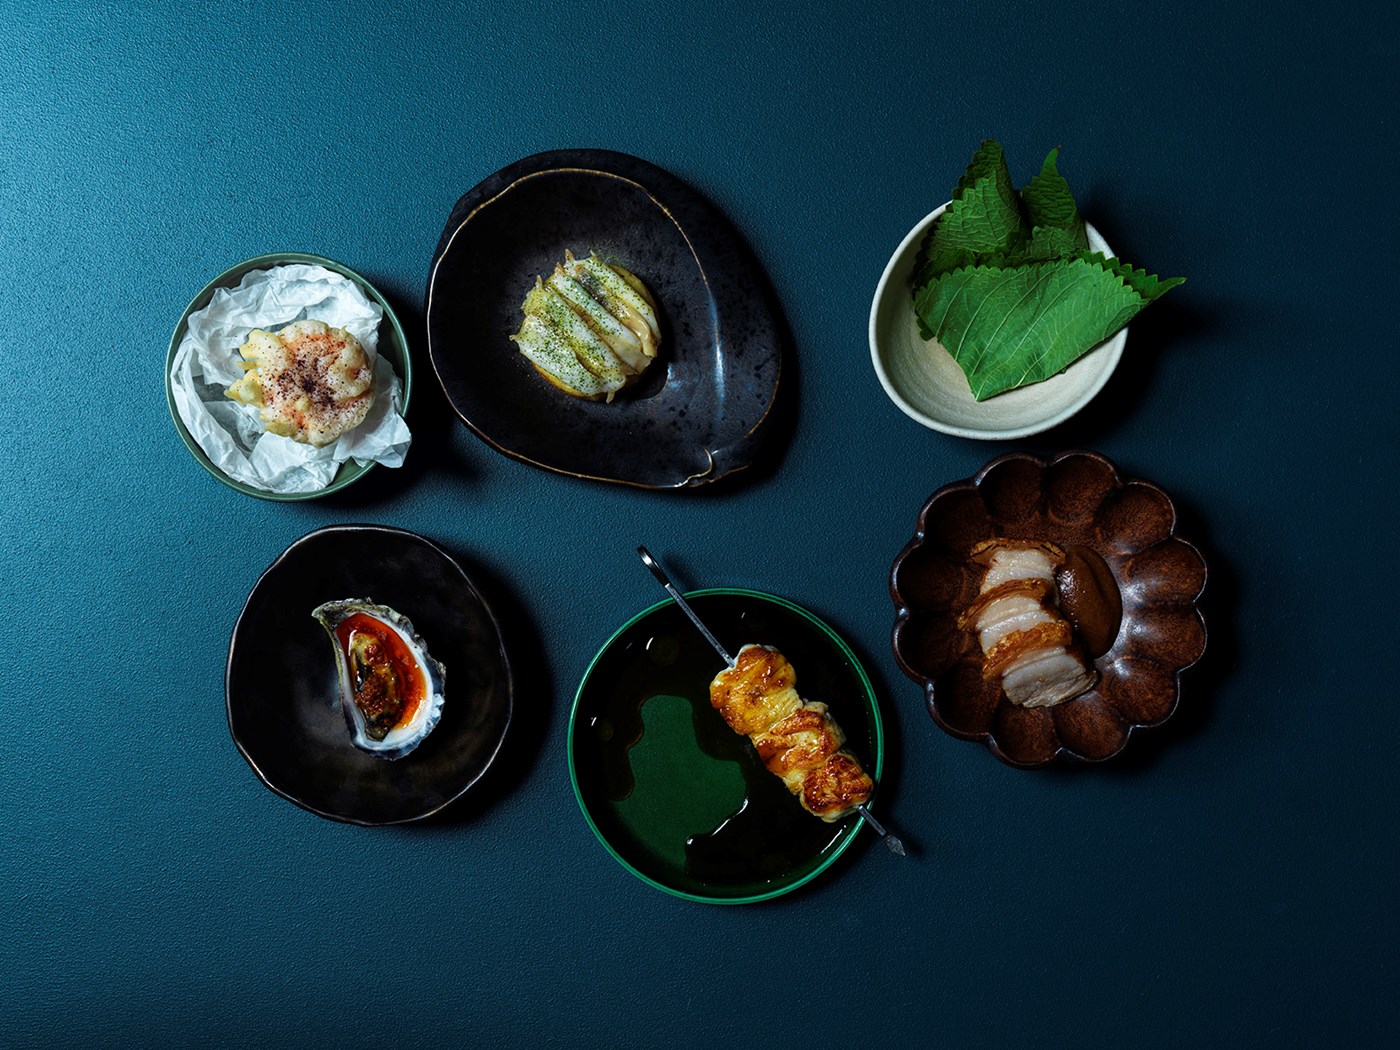 A selection of snack items in eclectic bowls against a vibrant blue background 